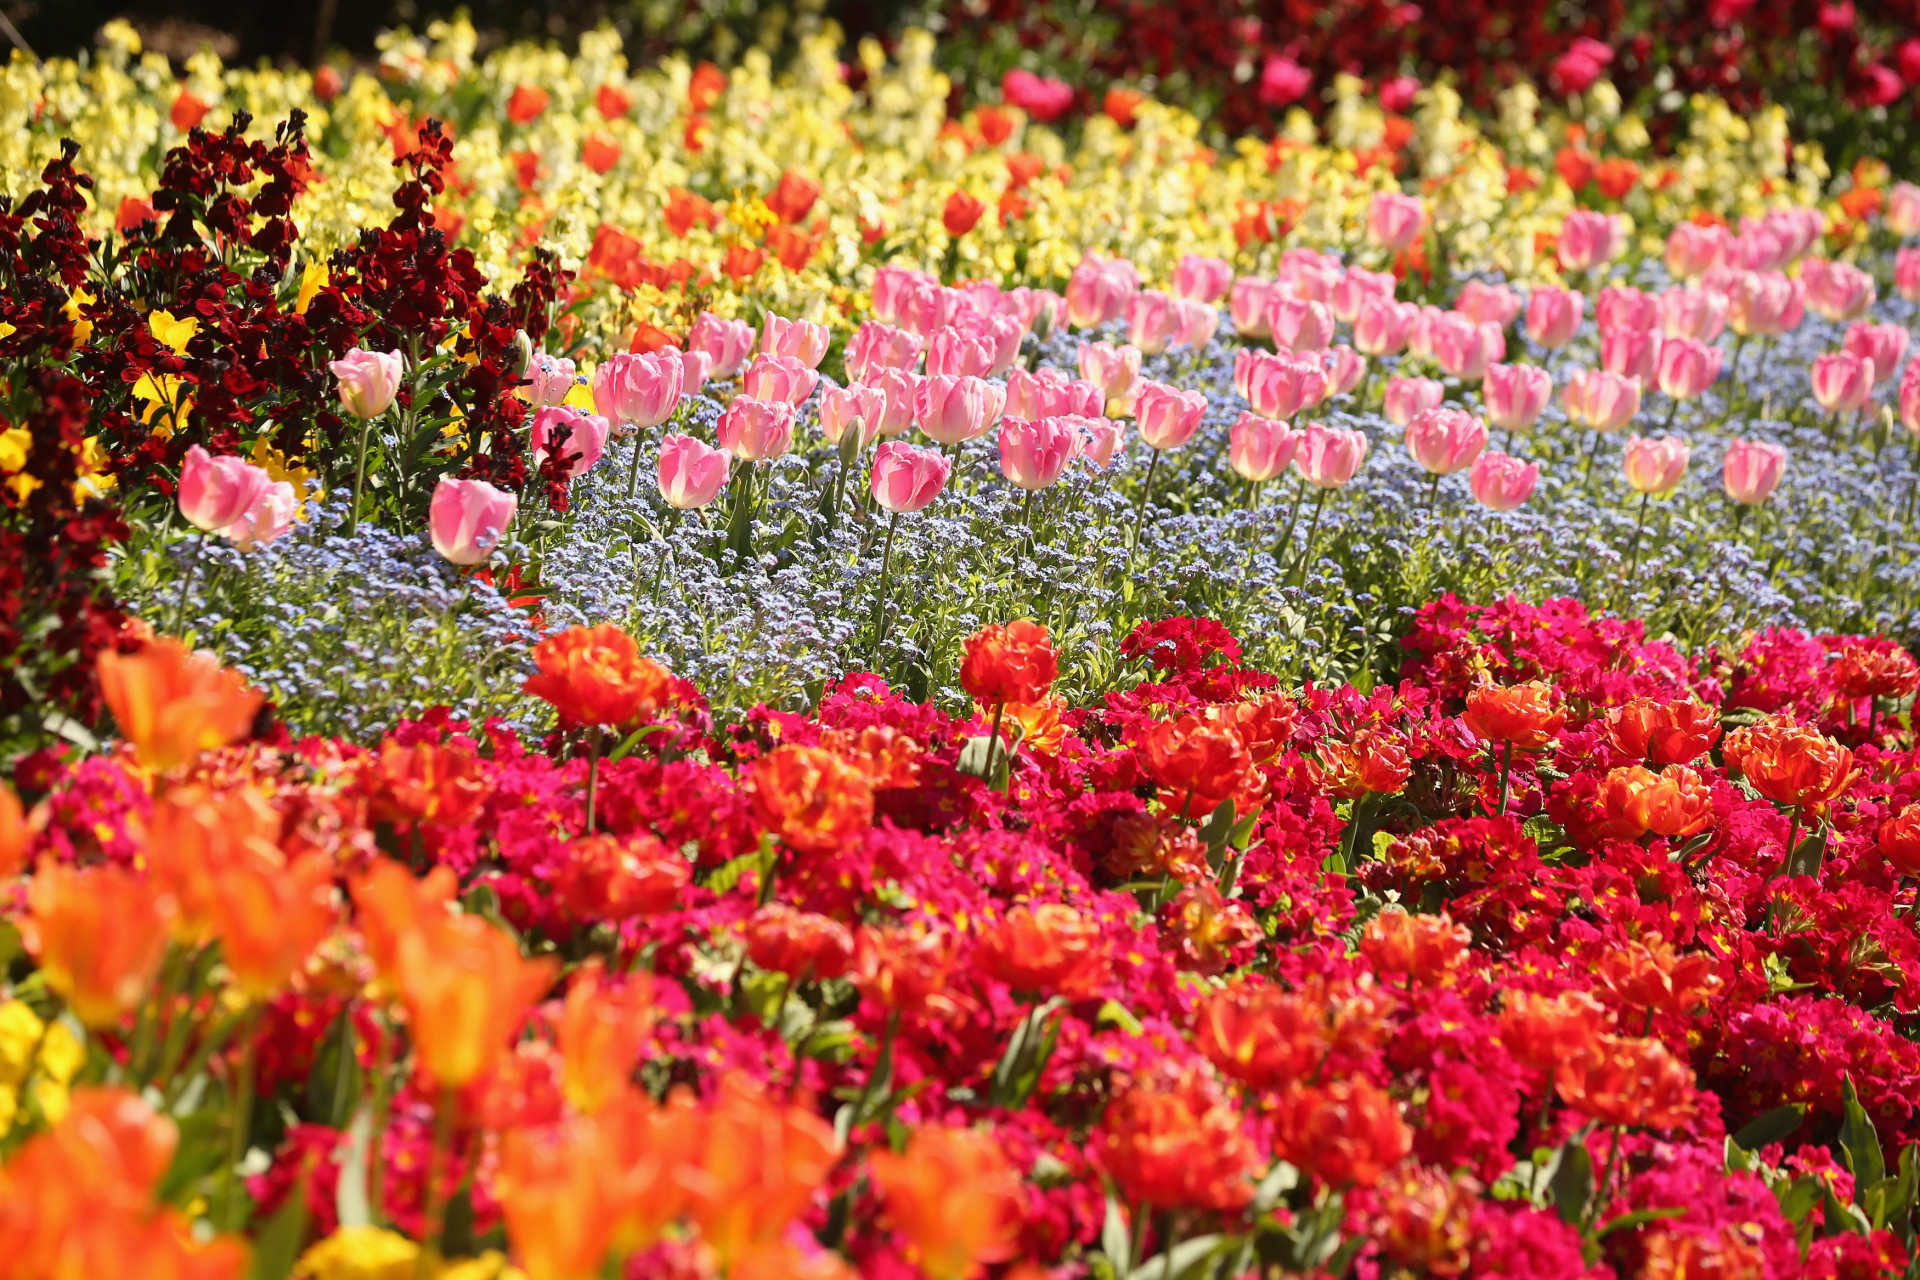 Tulips in full bloom in St James' Park as temperatures begin to rise across the UK. <p>You may also like:<a href="https://www.starsinsider.com/n/346898?utm_source=msn.com&utm_medium=display&utm_campaign=referral_description&utm_content=344596v2en-en"> The world's most extravagant sports stadiums</a></p>